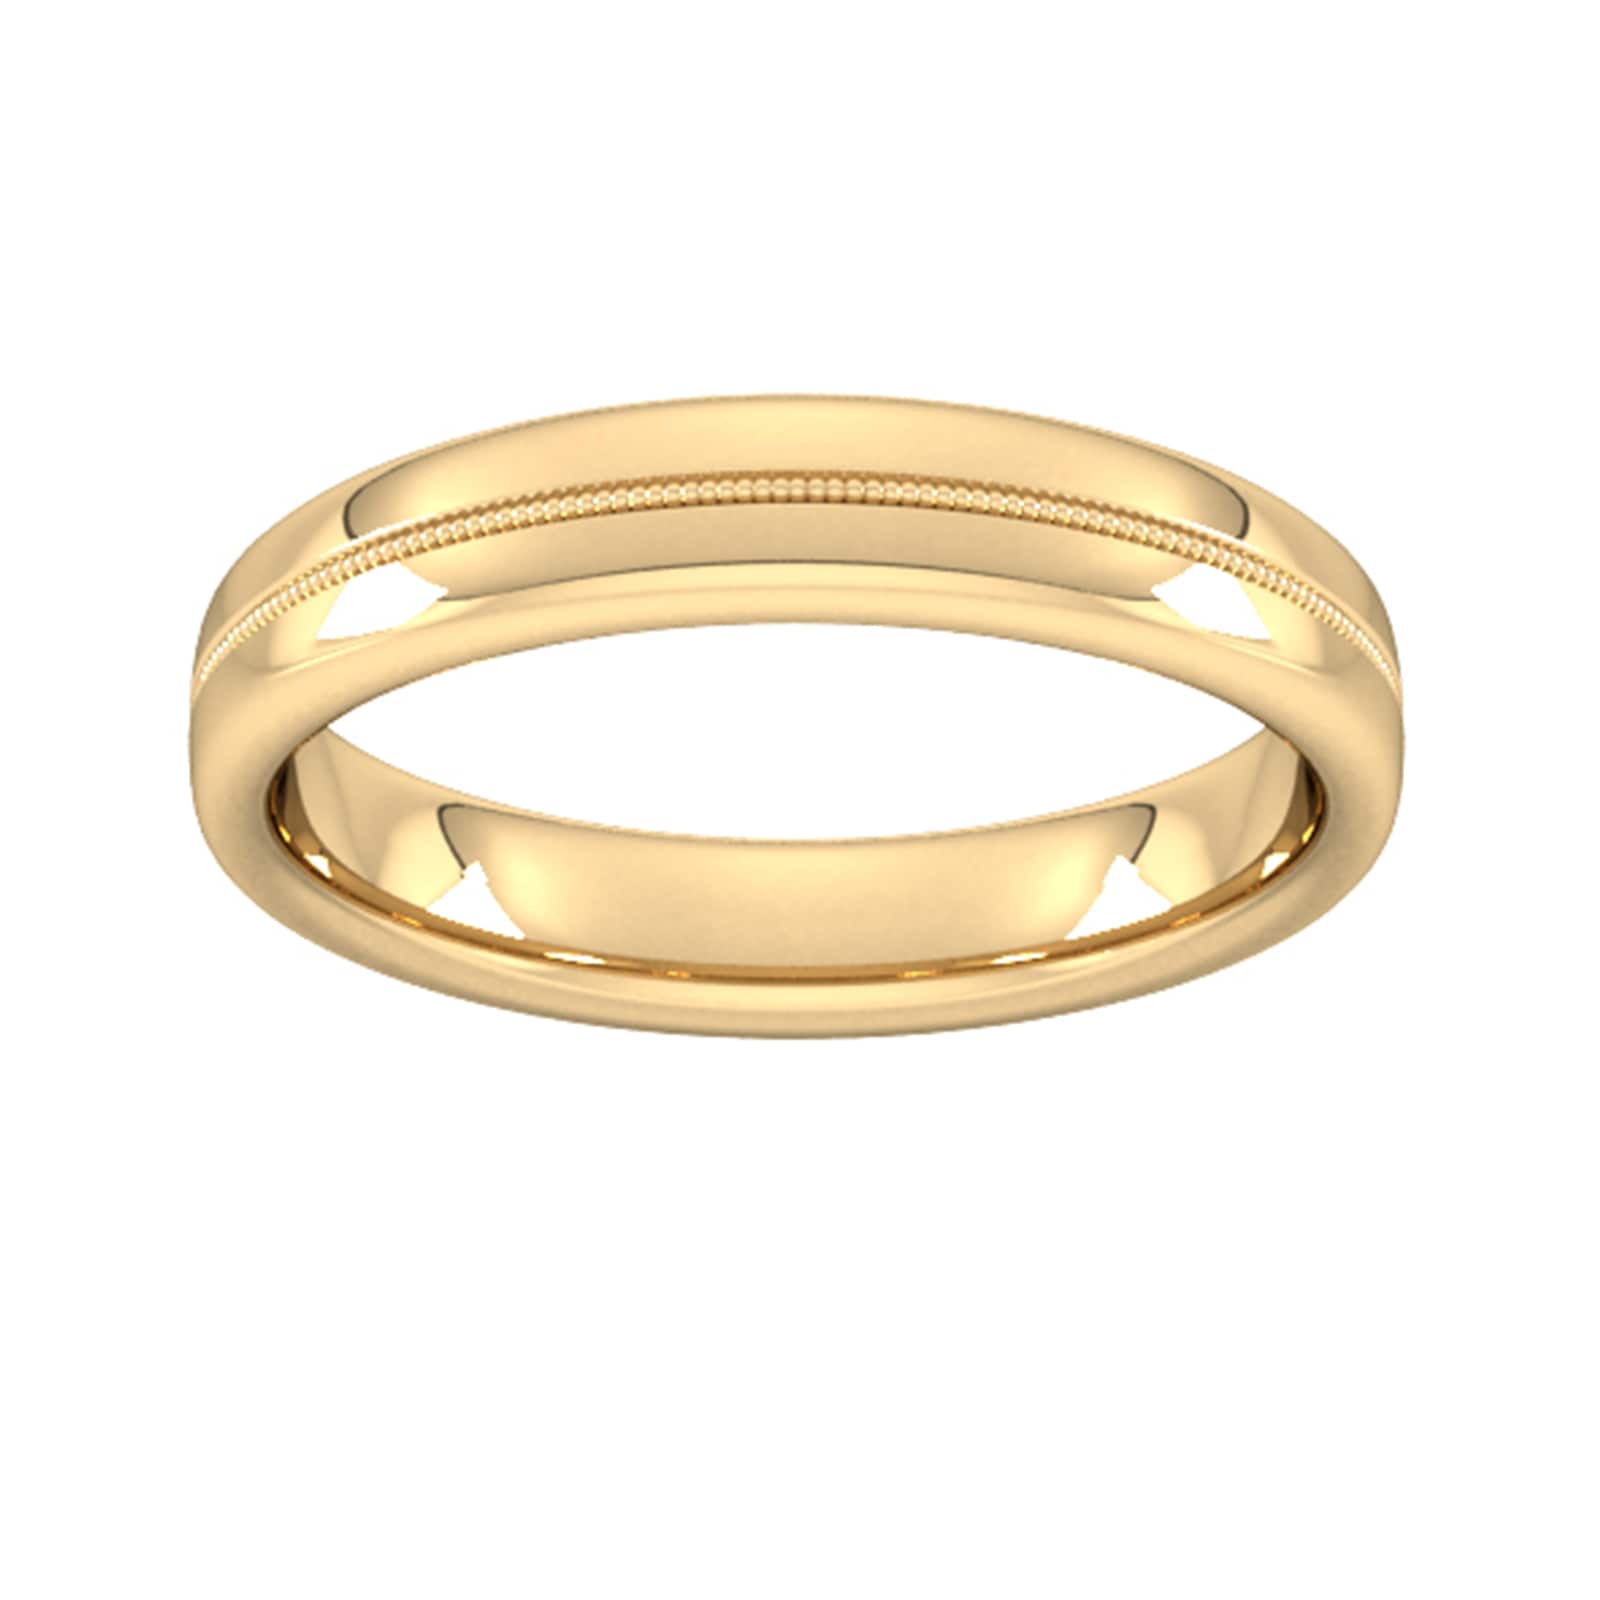 4mm Traditional Court Standard Milgrain Centre Wedding Ring In 9 Carat Yellow Gold - Ring Size M